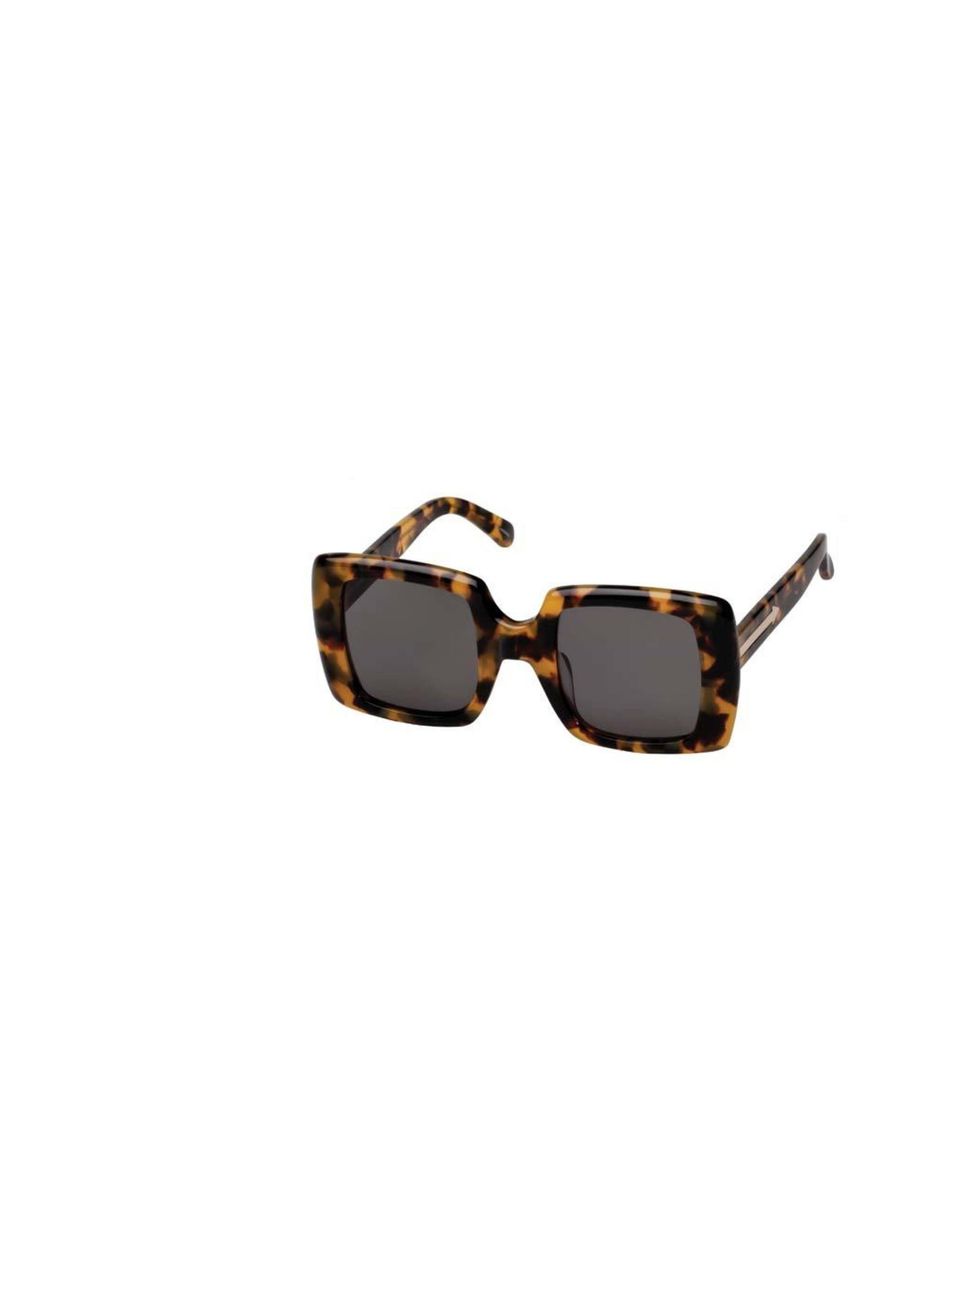 <p>These oversized square sunglasses fall just on the right side of bonkers; grown-up tortoiseshell makes the quirky design wearable... <a href="http://shop.karenwalker.com/products/betsy-crazy-tortoise">Karen Walker Eyewear</a> sunglasses, £165</p>